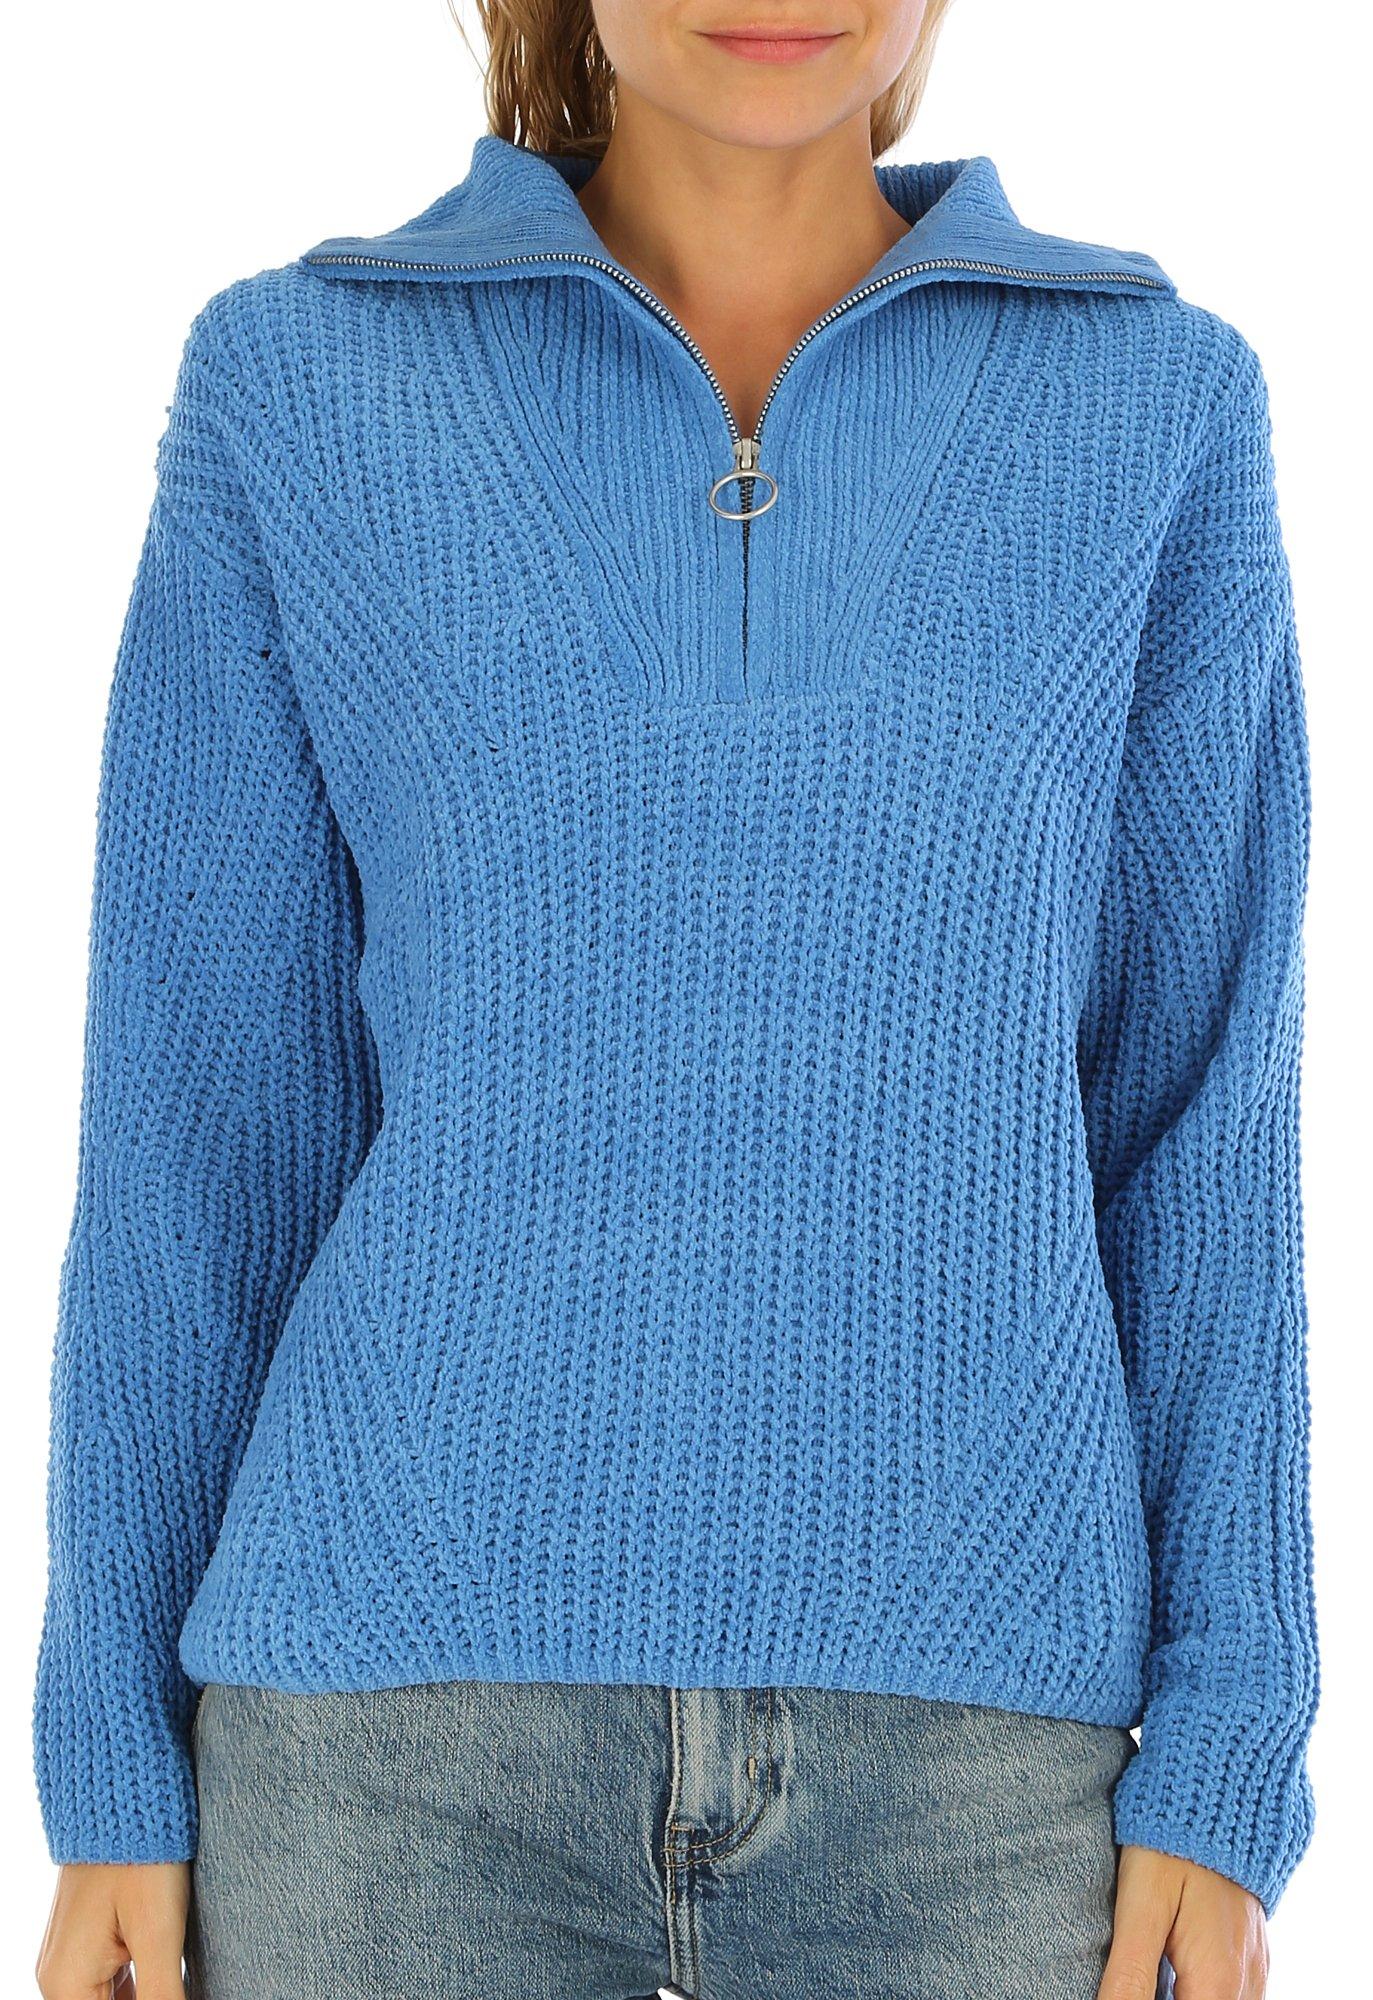 Juniors Knit Pull Over Sweater